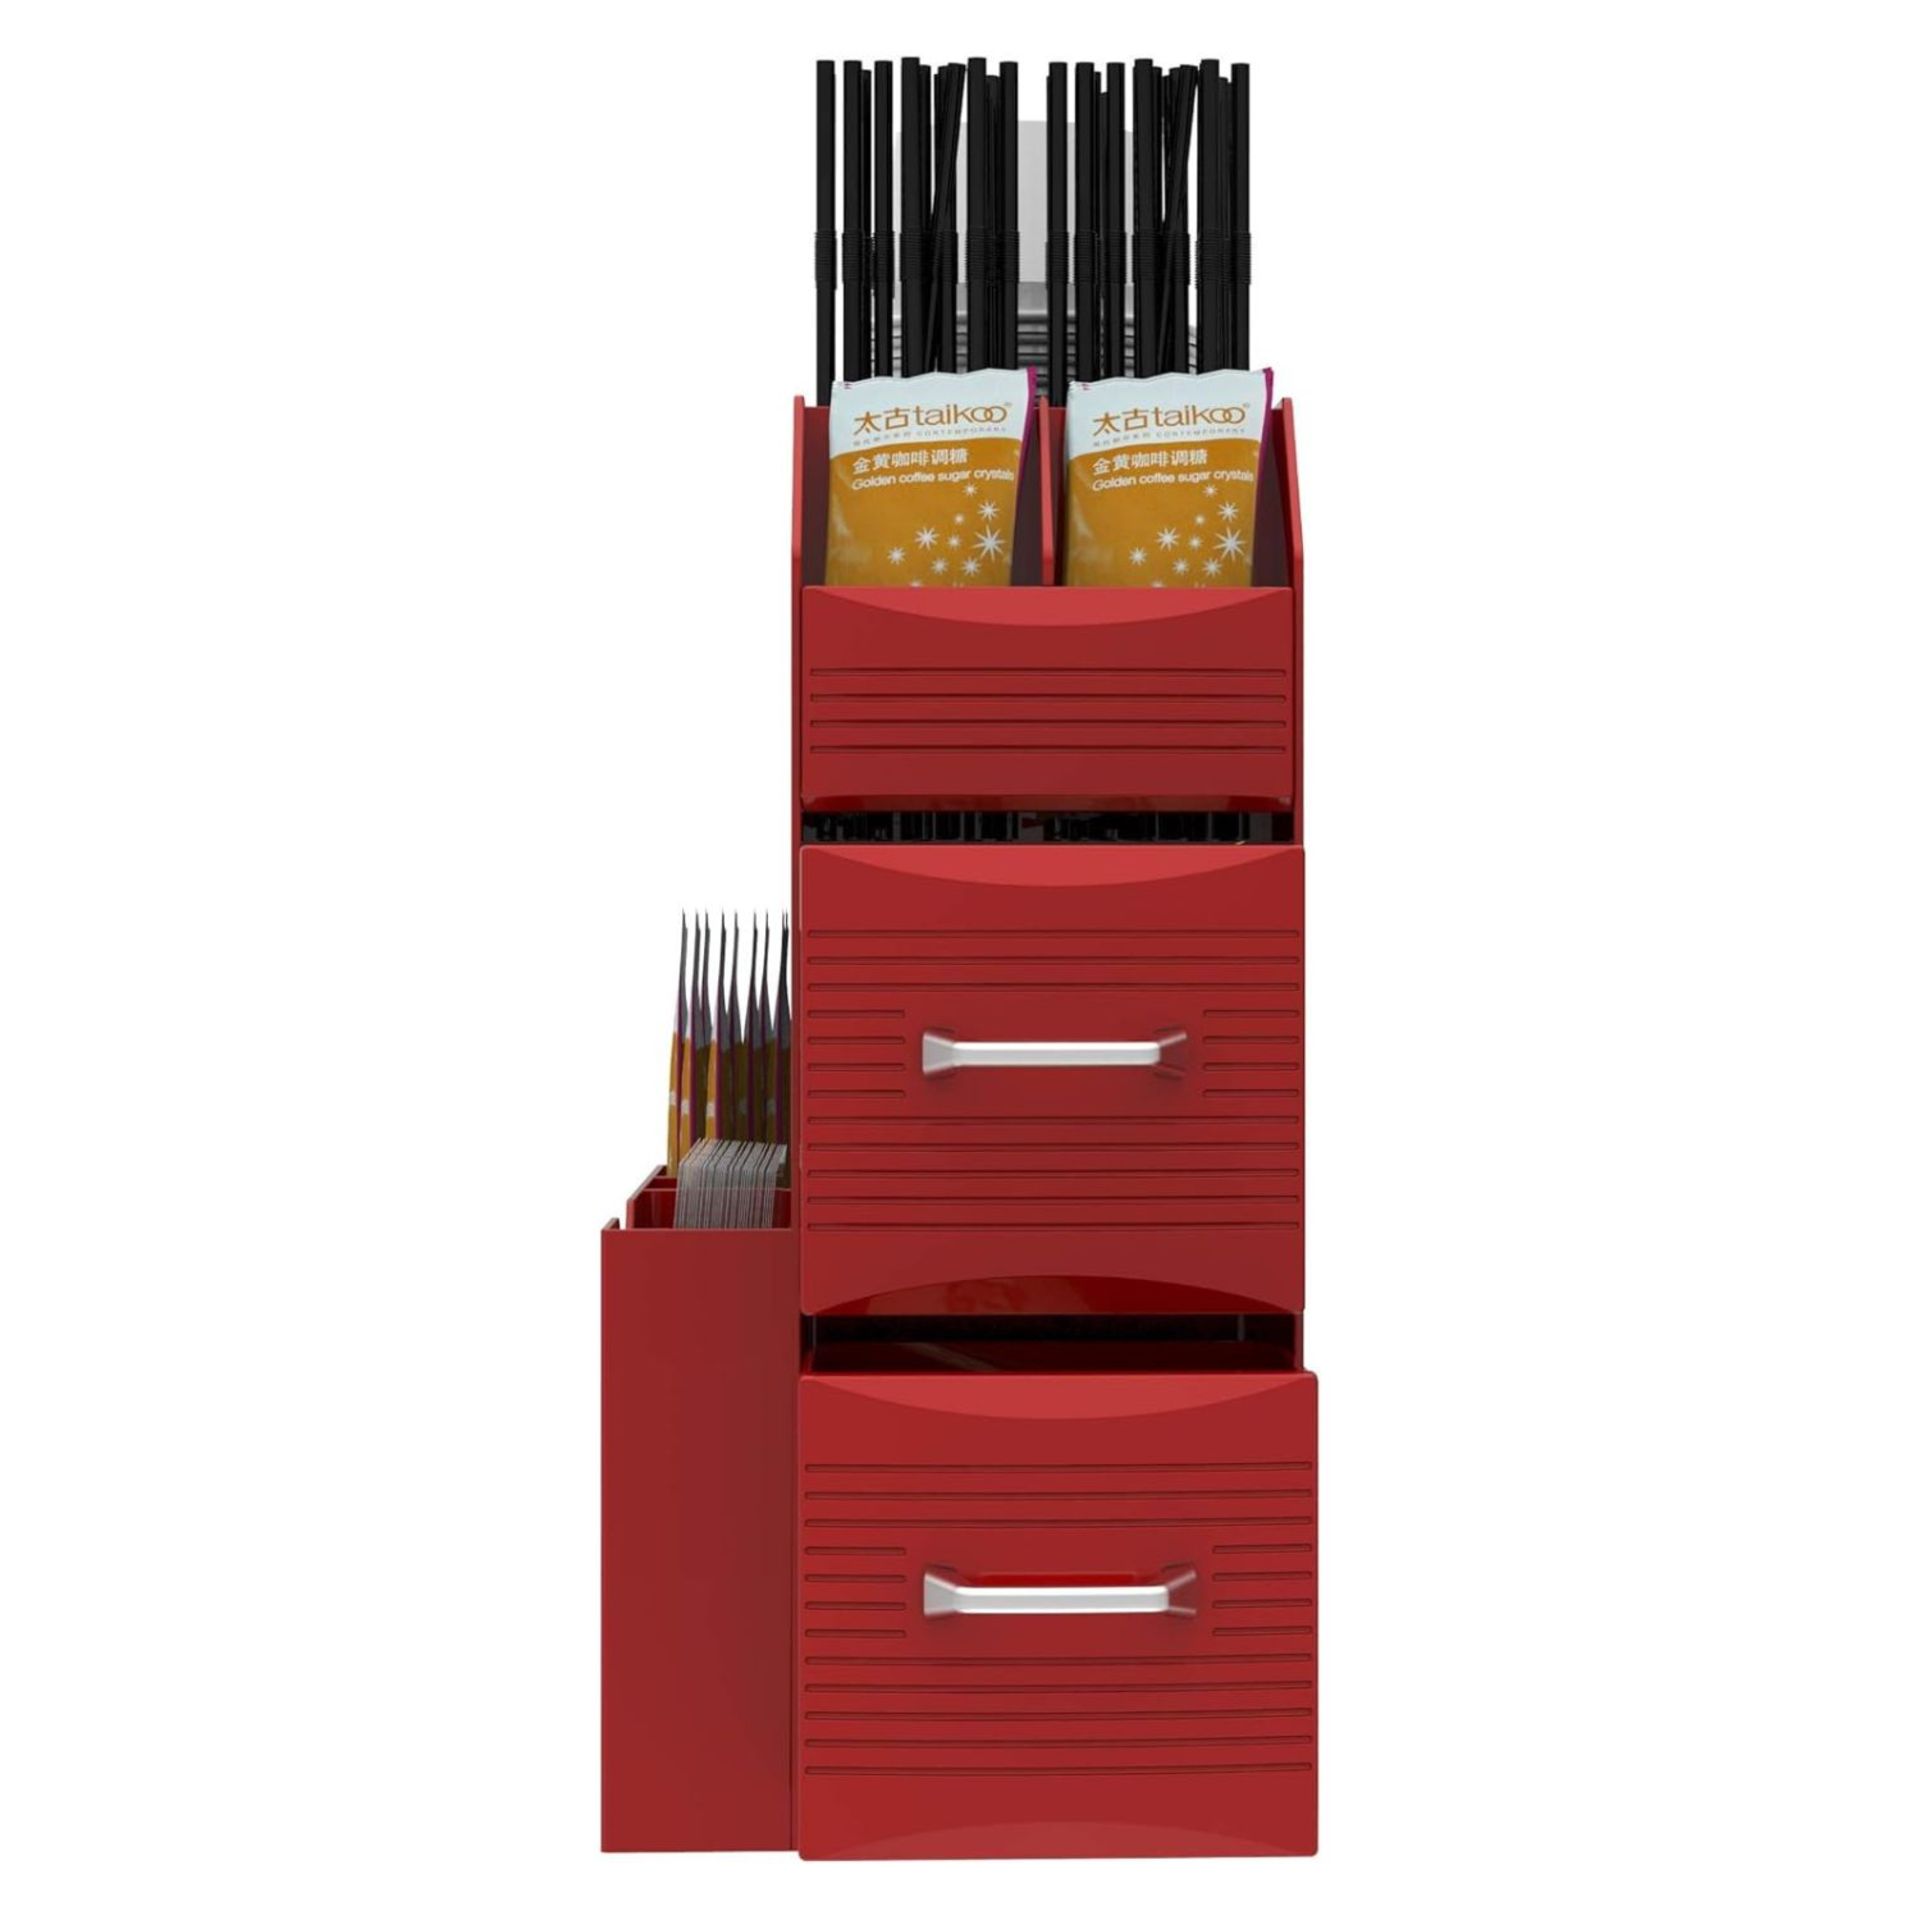 FULL PALLET OF RED HALTER COFFEE ACCESSORIES CADDY ORGANIZER - 9 COMPARTMENTS AND 2 DRAWERS - Image 5 of 6